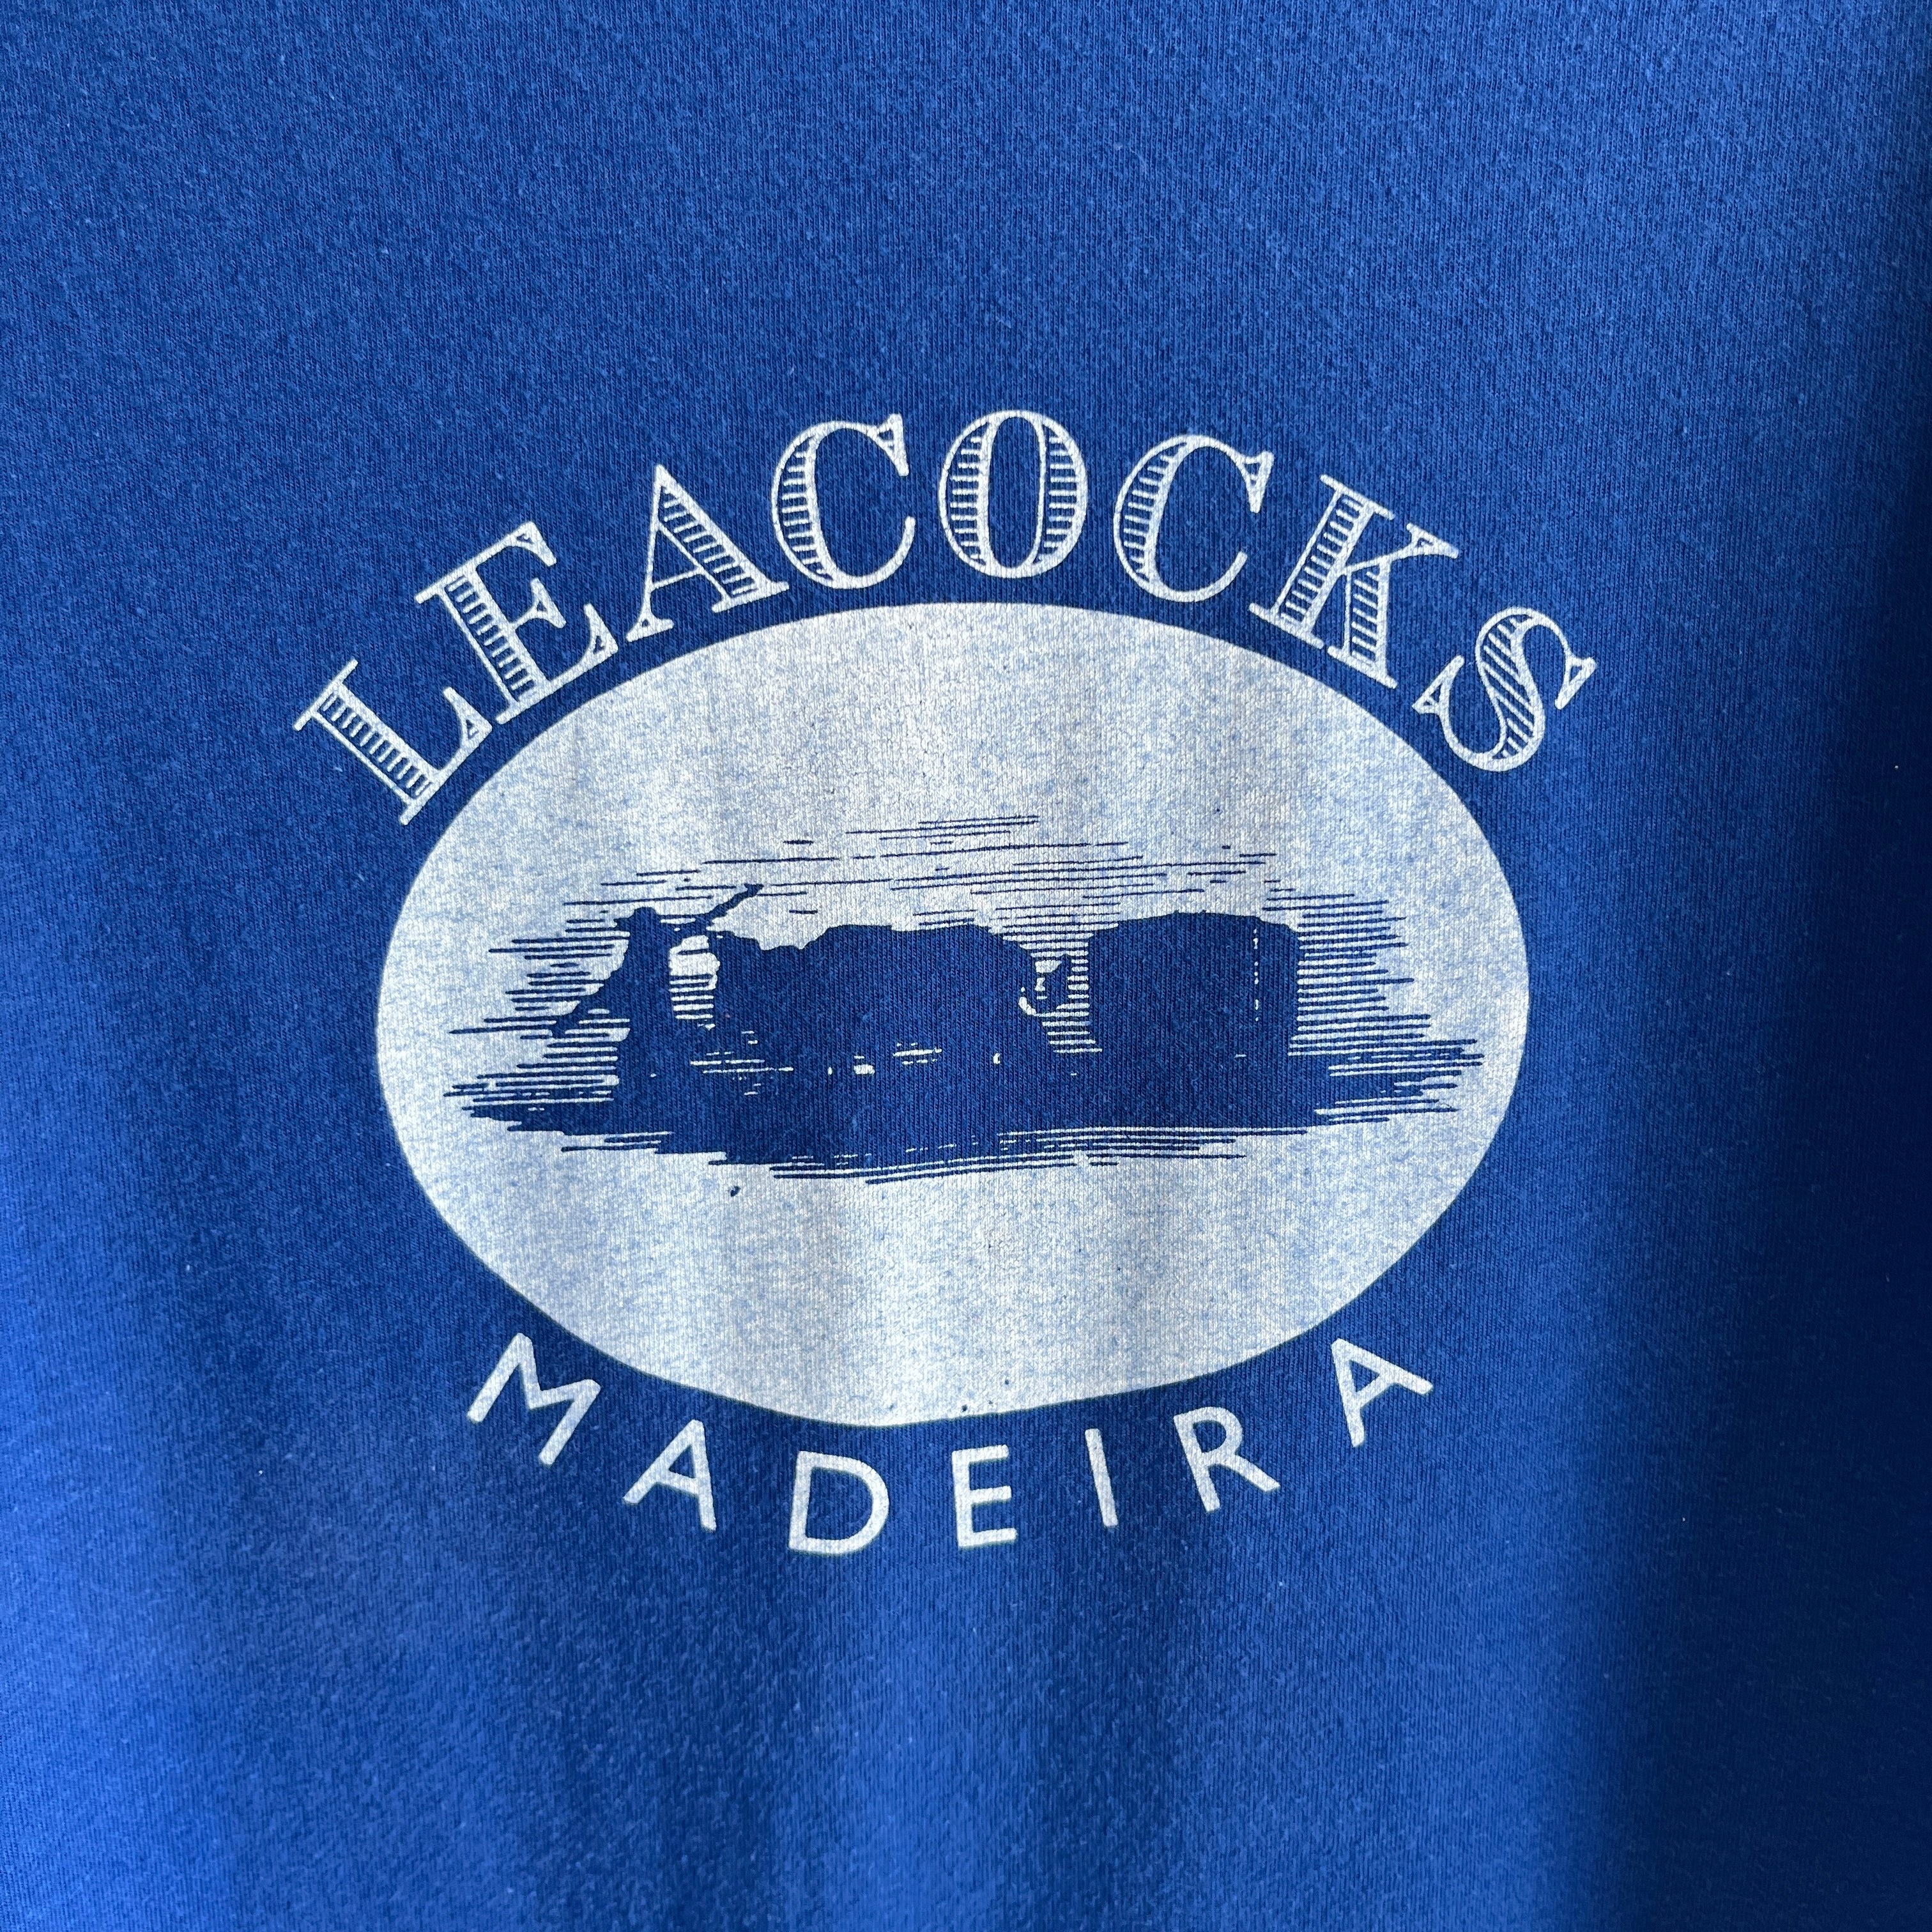 1980s Drink Quality Madeira - Leacocks Madeira Front and Back T-Shirt (Side Seams)